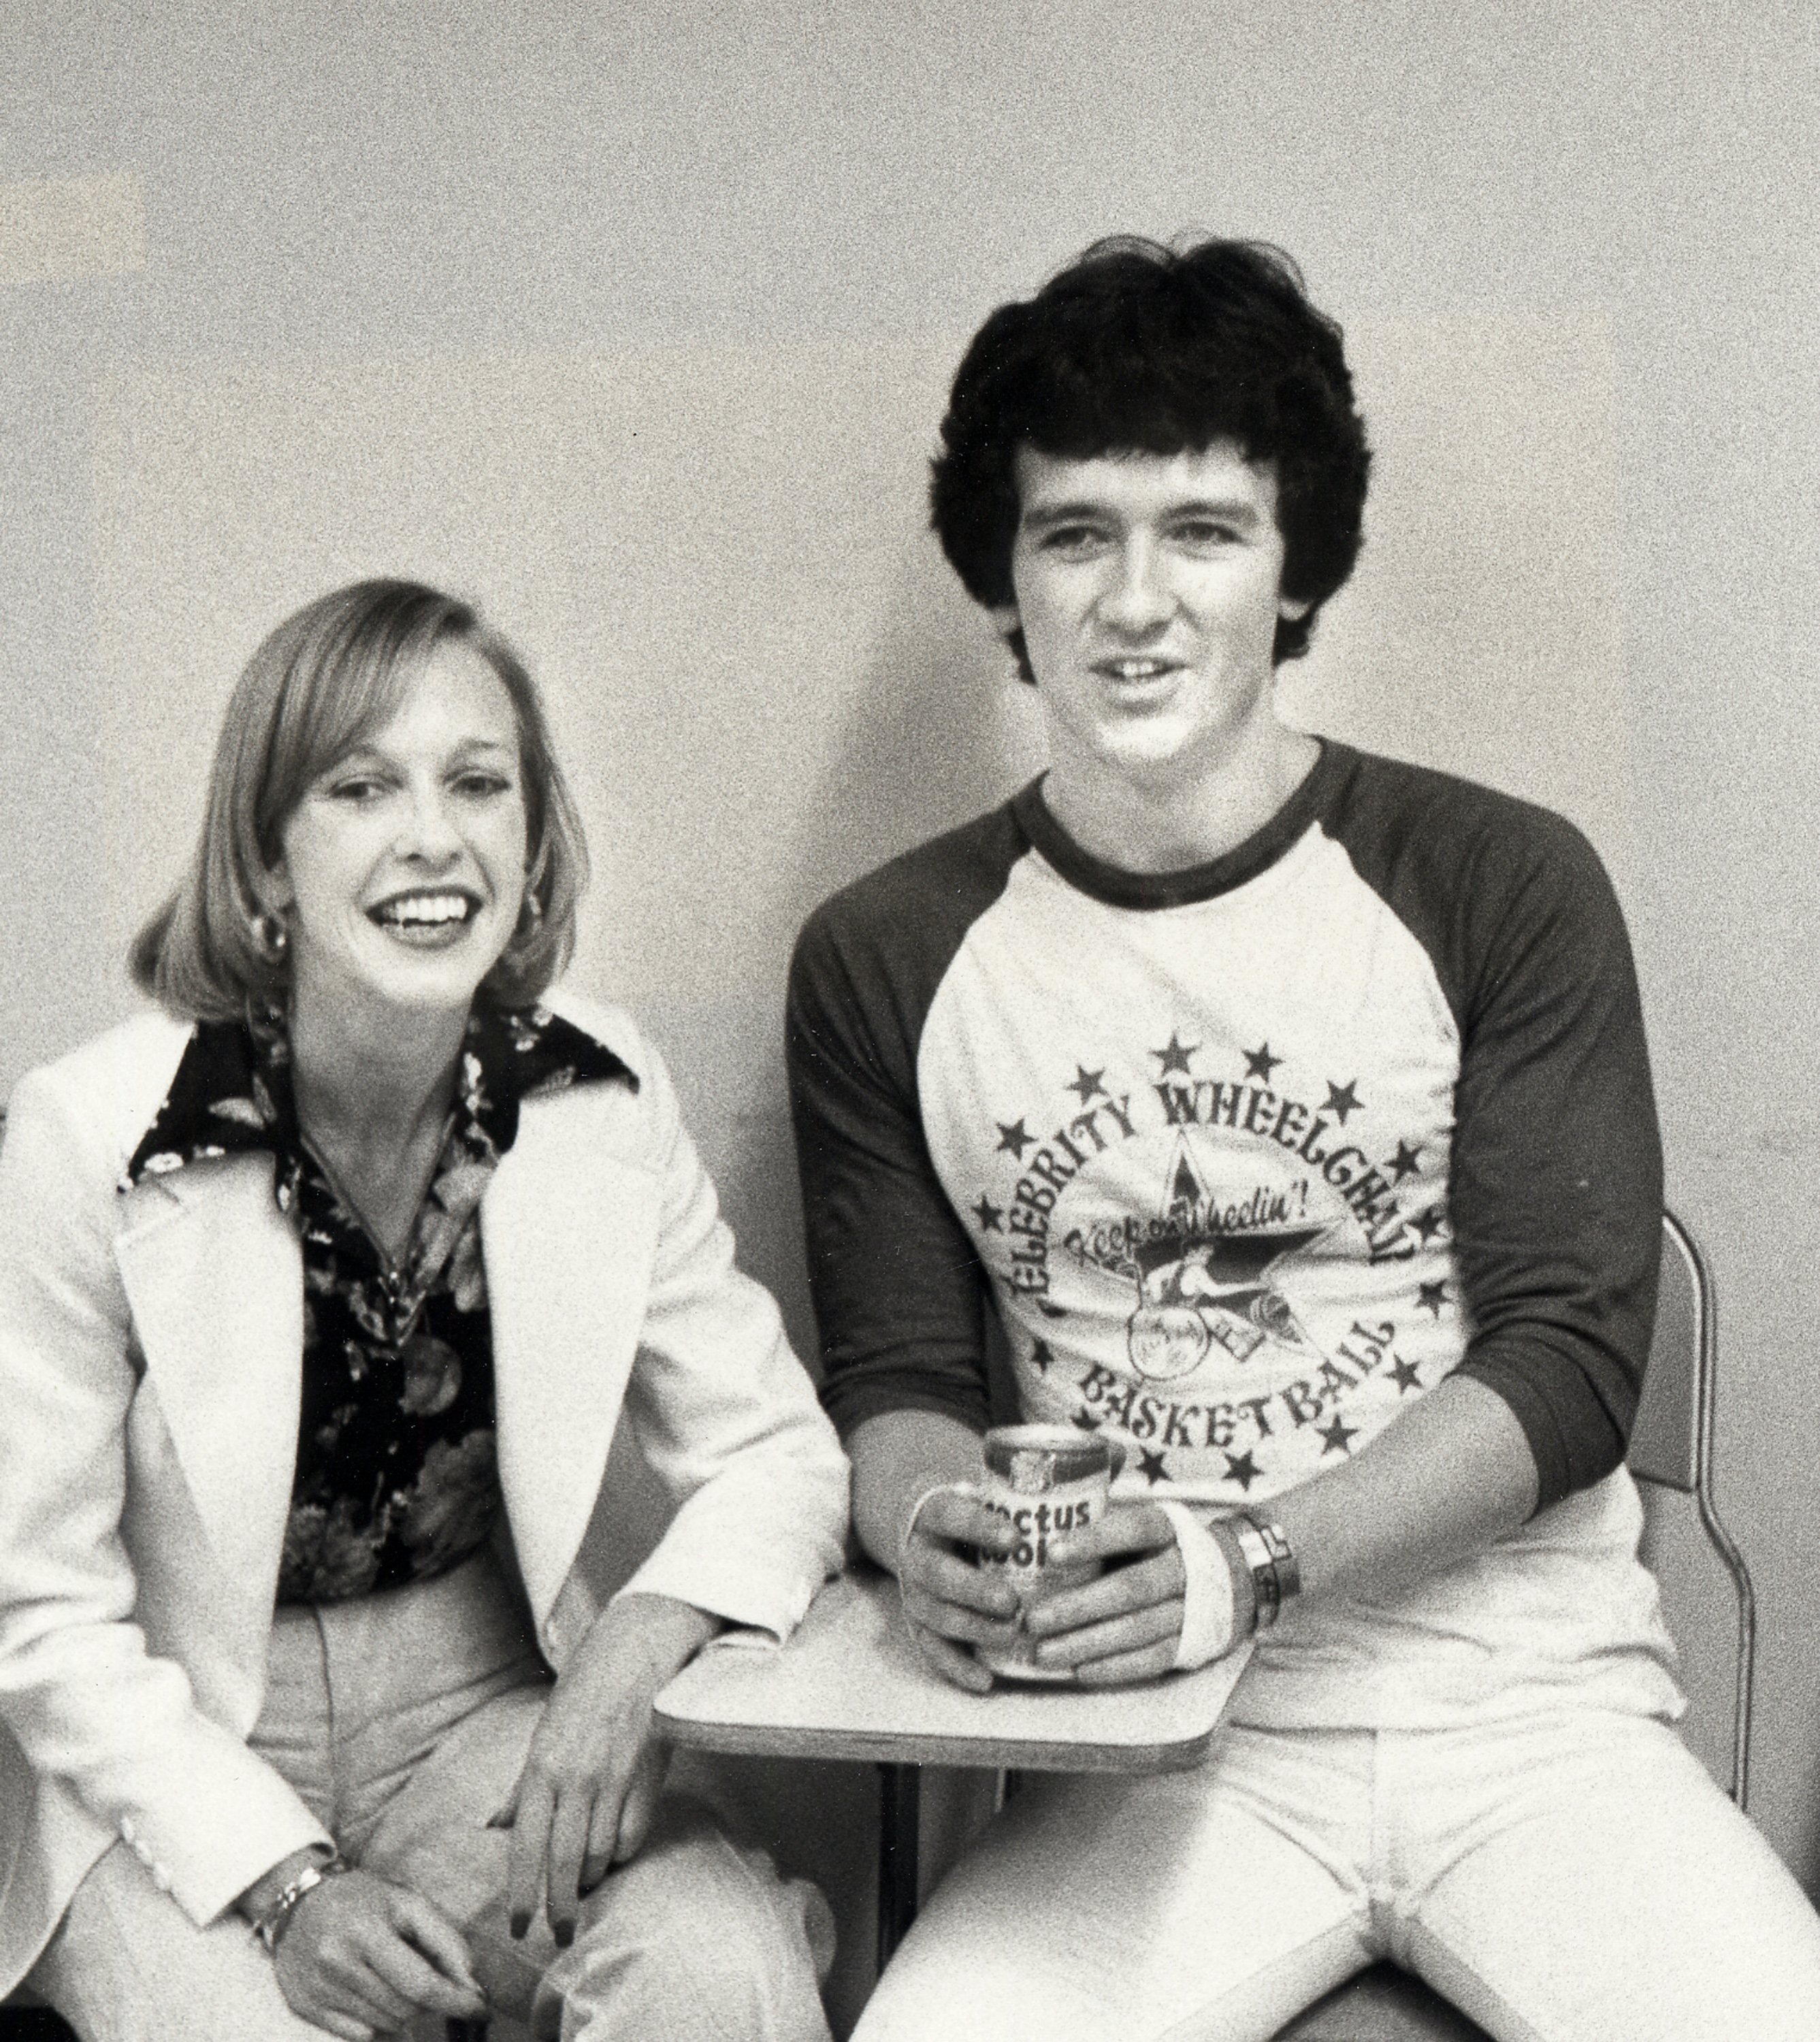 Patrick Duffy and wife Carlyn Rosser attend a basketball game at California State University on May 22, 1977 in Northridge. | Photo: Getty Images